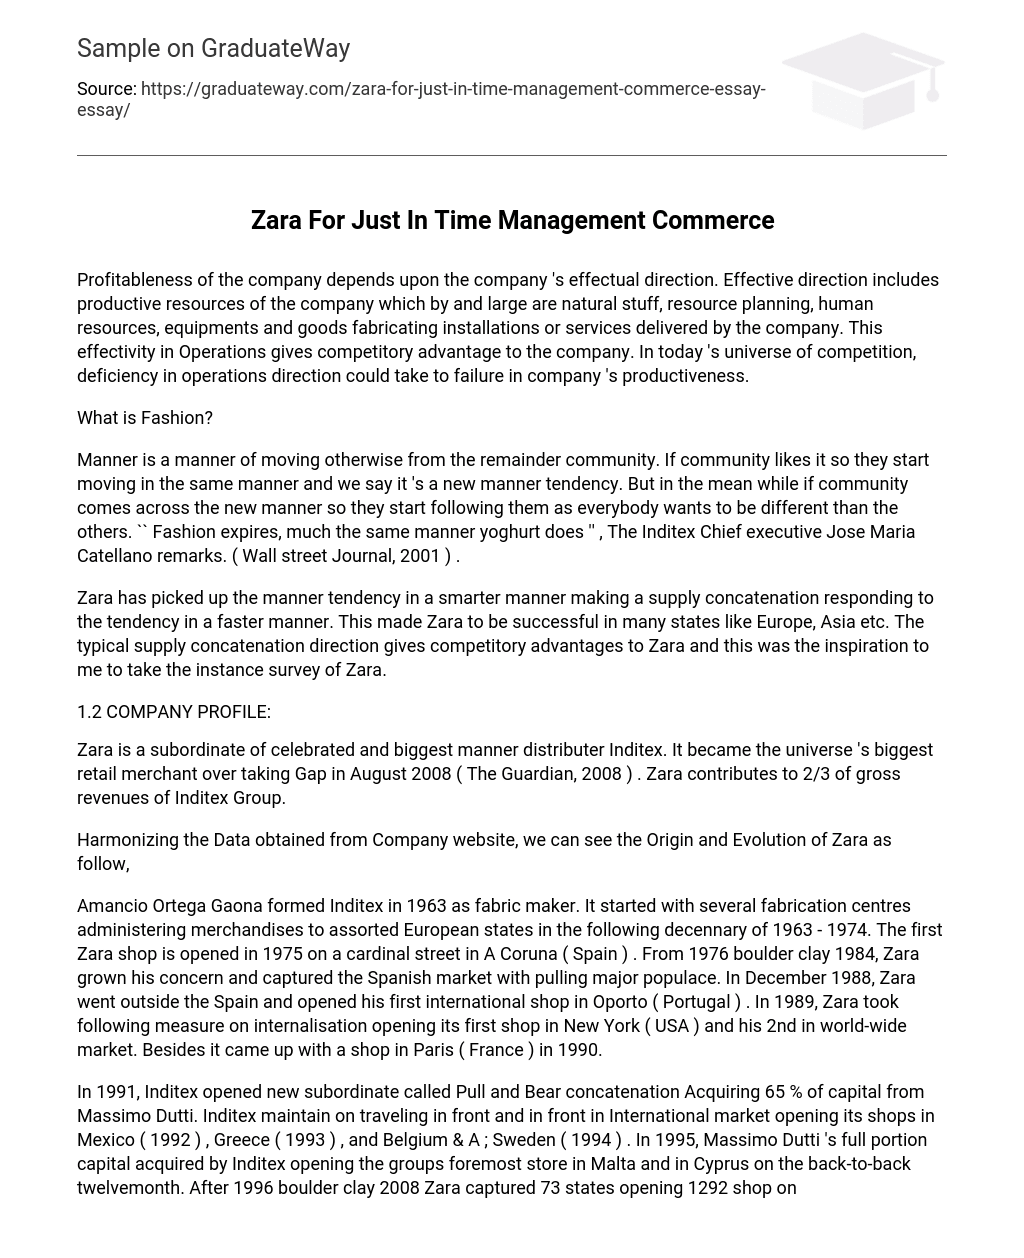 Zara For Just In Time Management Commerce